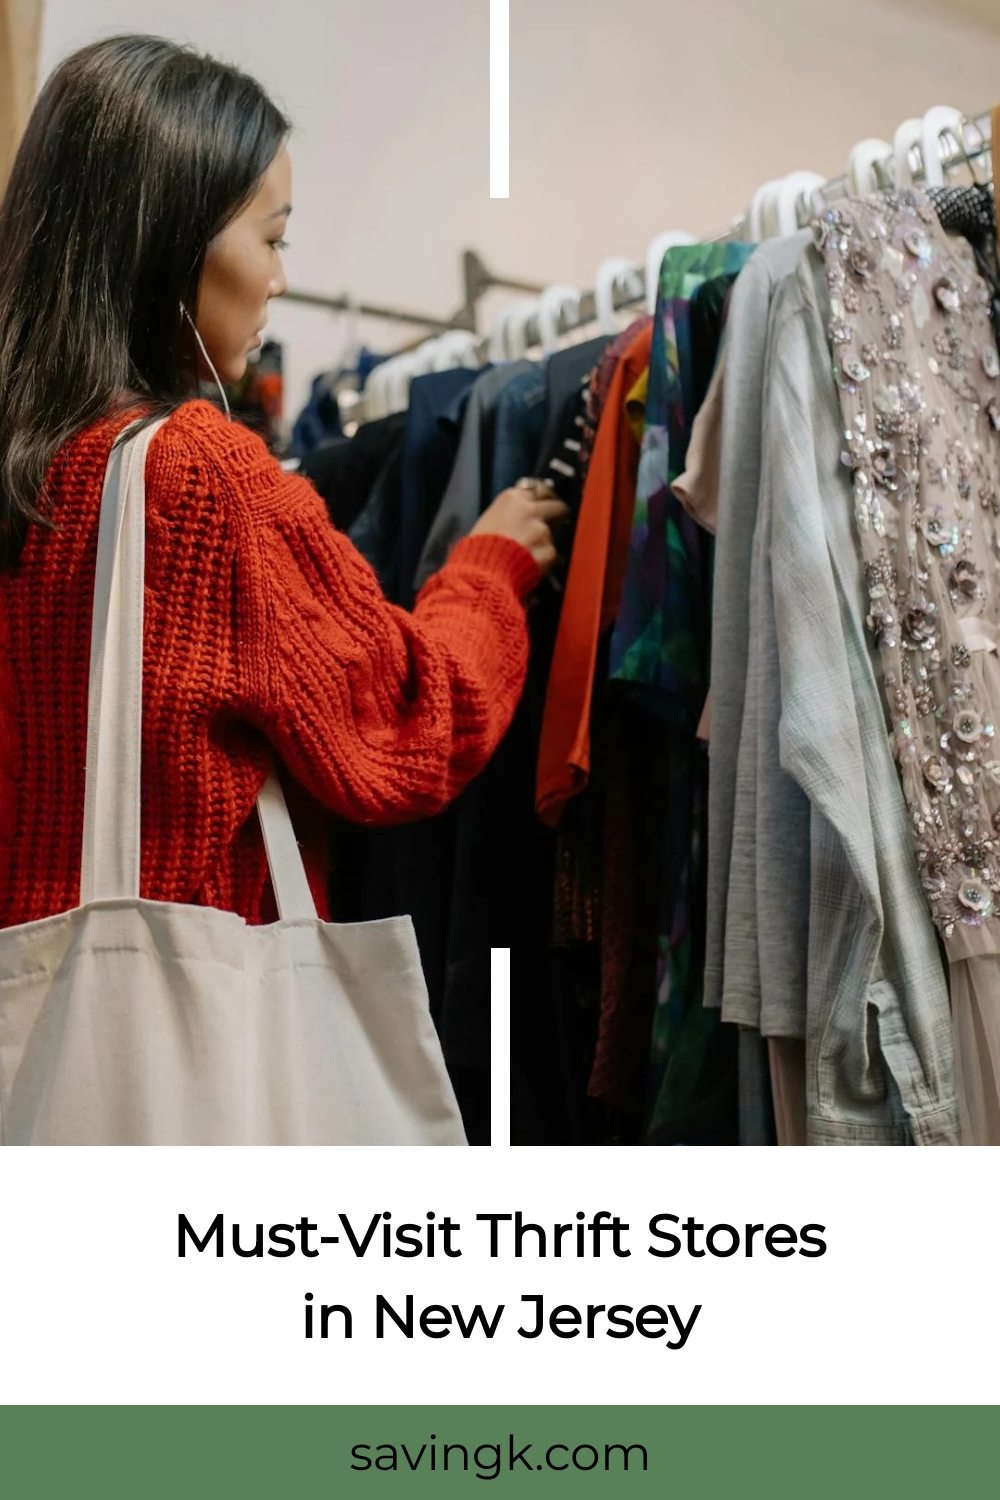 Must-Visit Thrift Stores in New Jersey